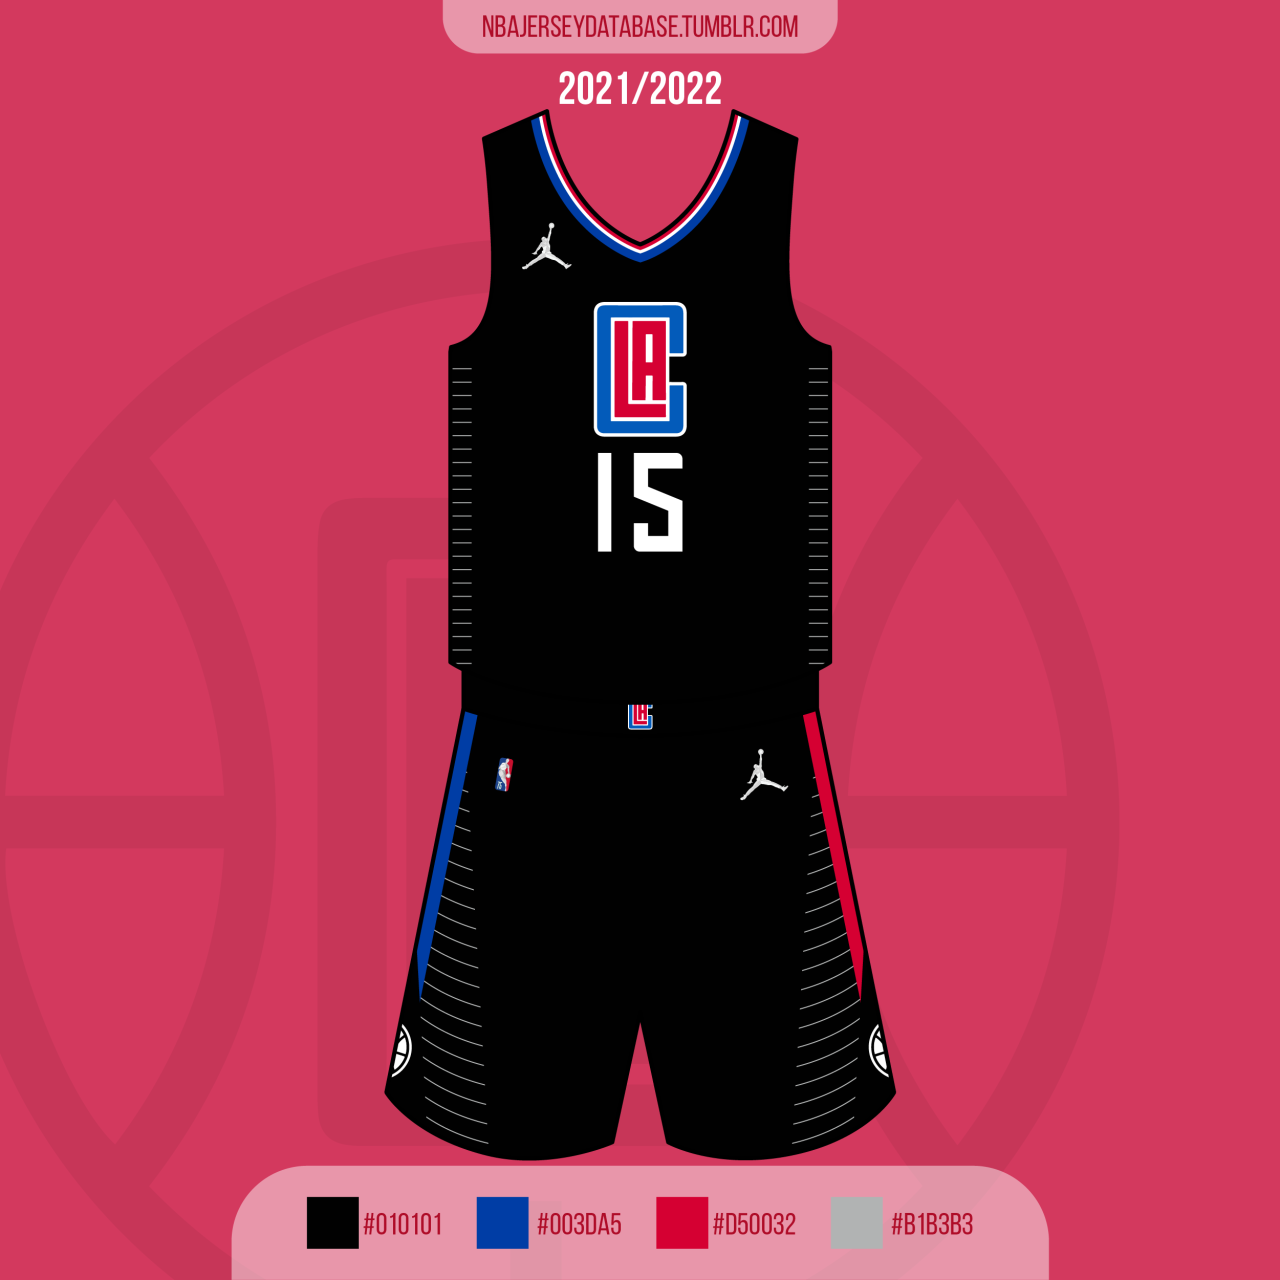 NBA Jersey Database, Los Angeles Clippers Earned Jersey 2020-2021